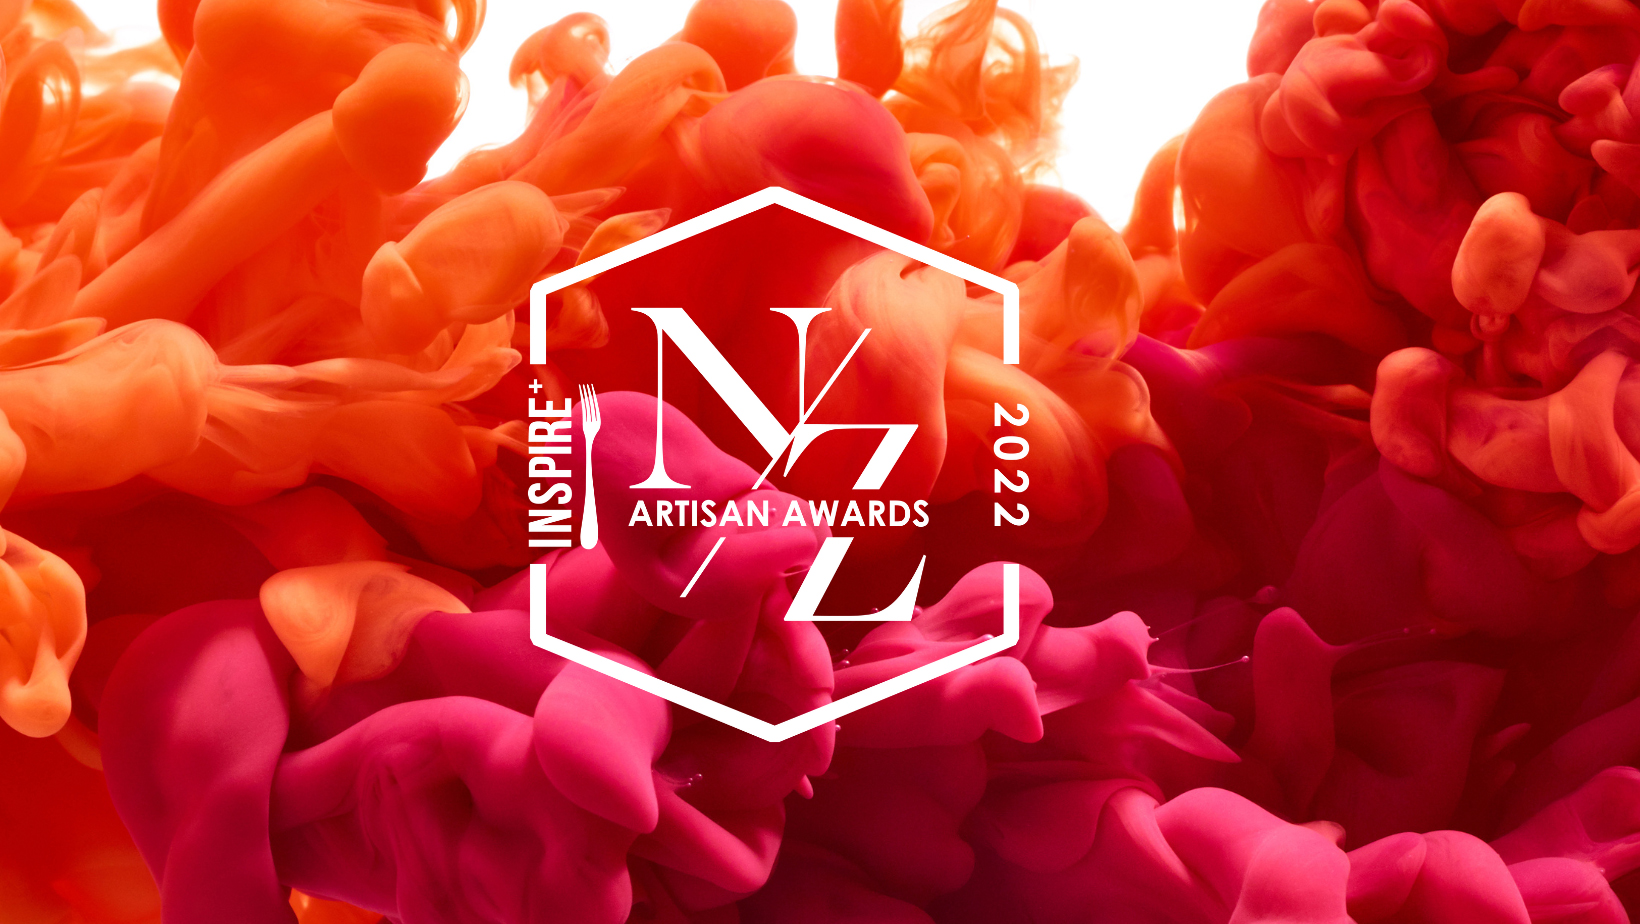 Are You Ready For The 2022 New Zealand Artisan Awards?